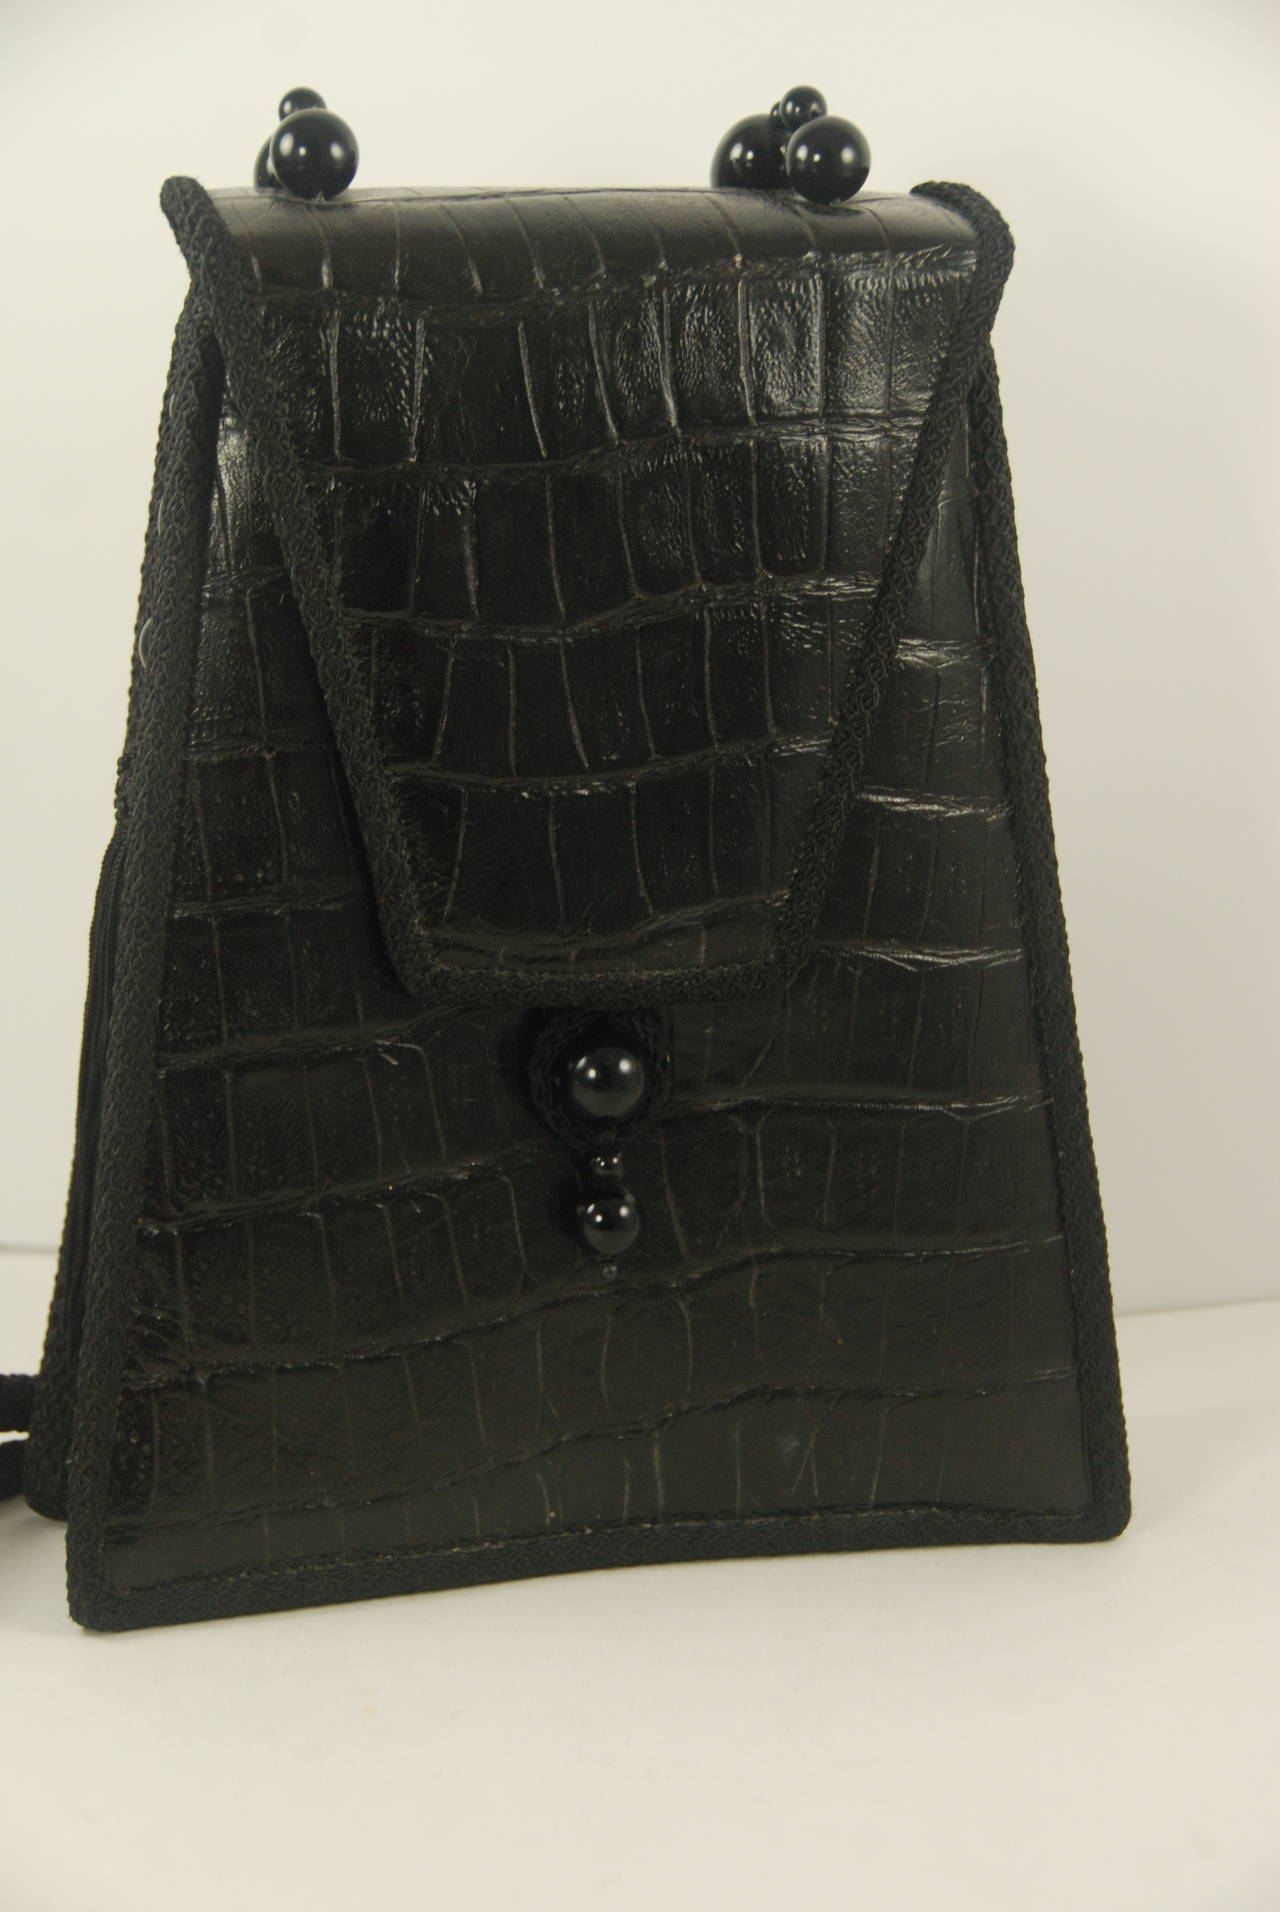 Asian inspired Rafael Sanchez alligator shoulder bag with woven silk cord and decorative bead strap. There is also a bead and black silk and bead tassel on the side of the bag that is decorative. Piping on the bag is woven black silk. Inside is